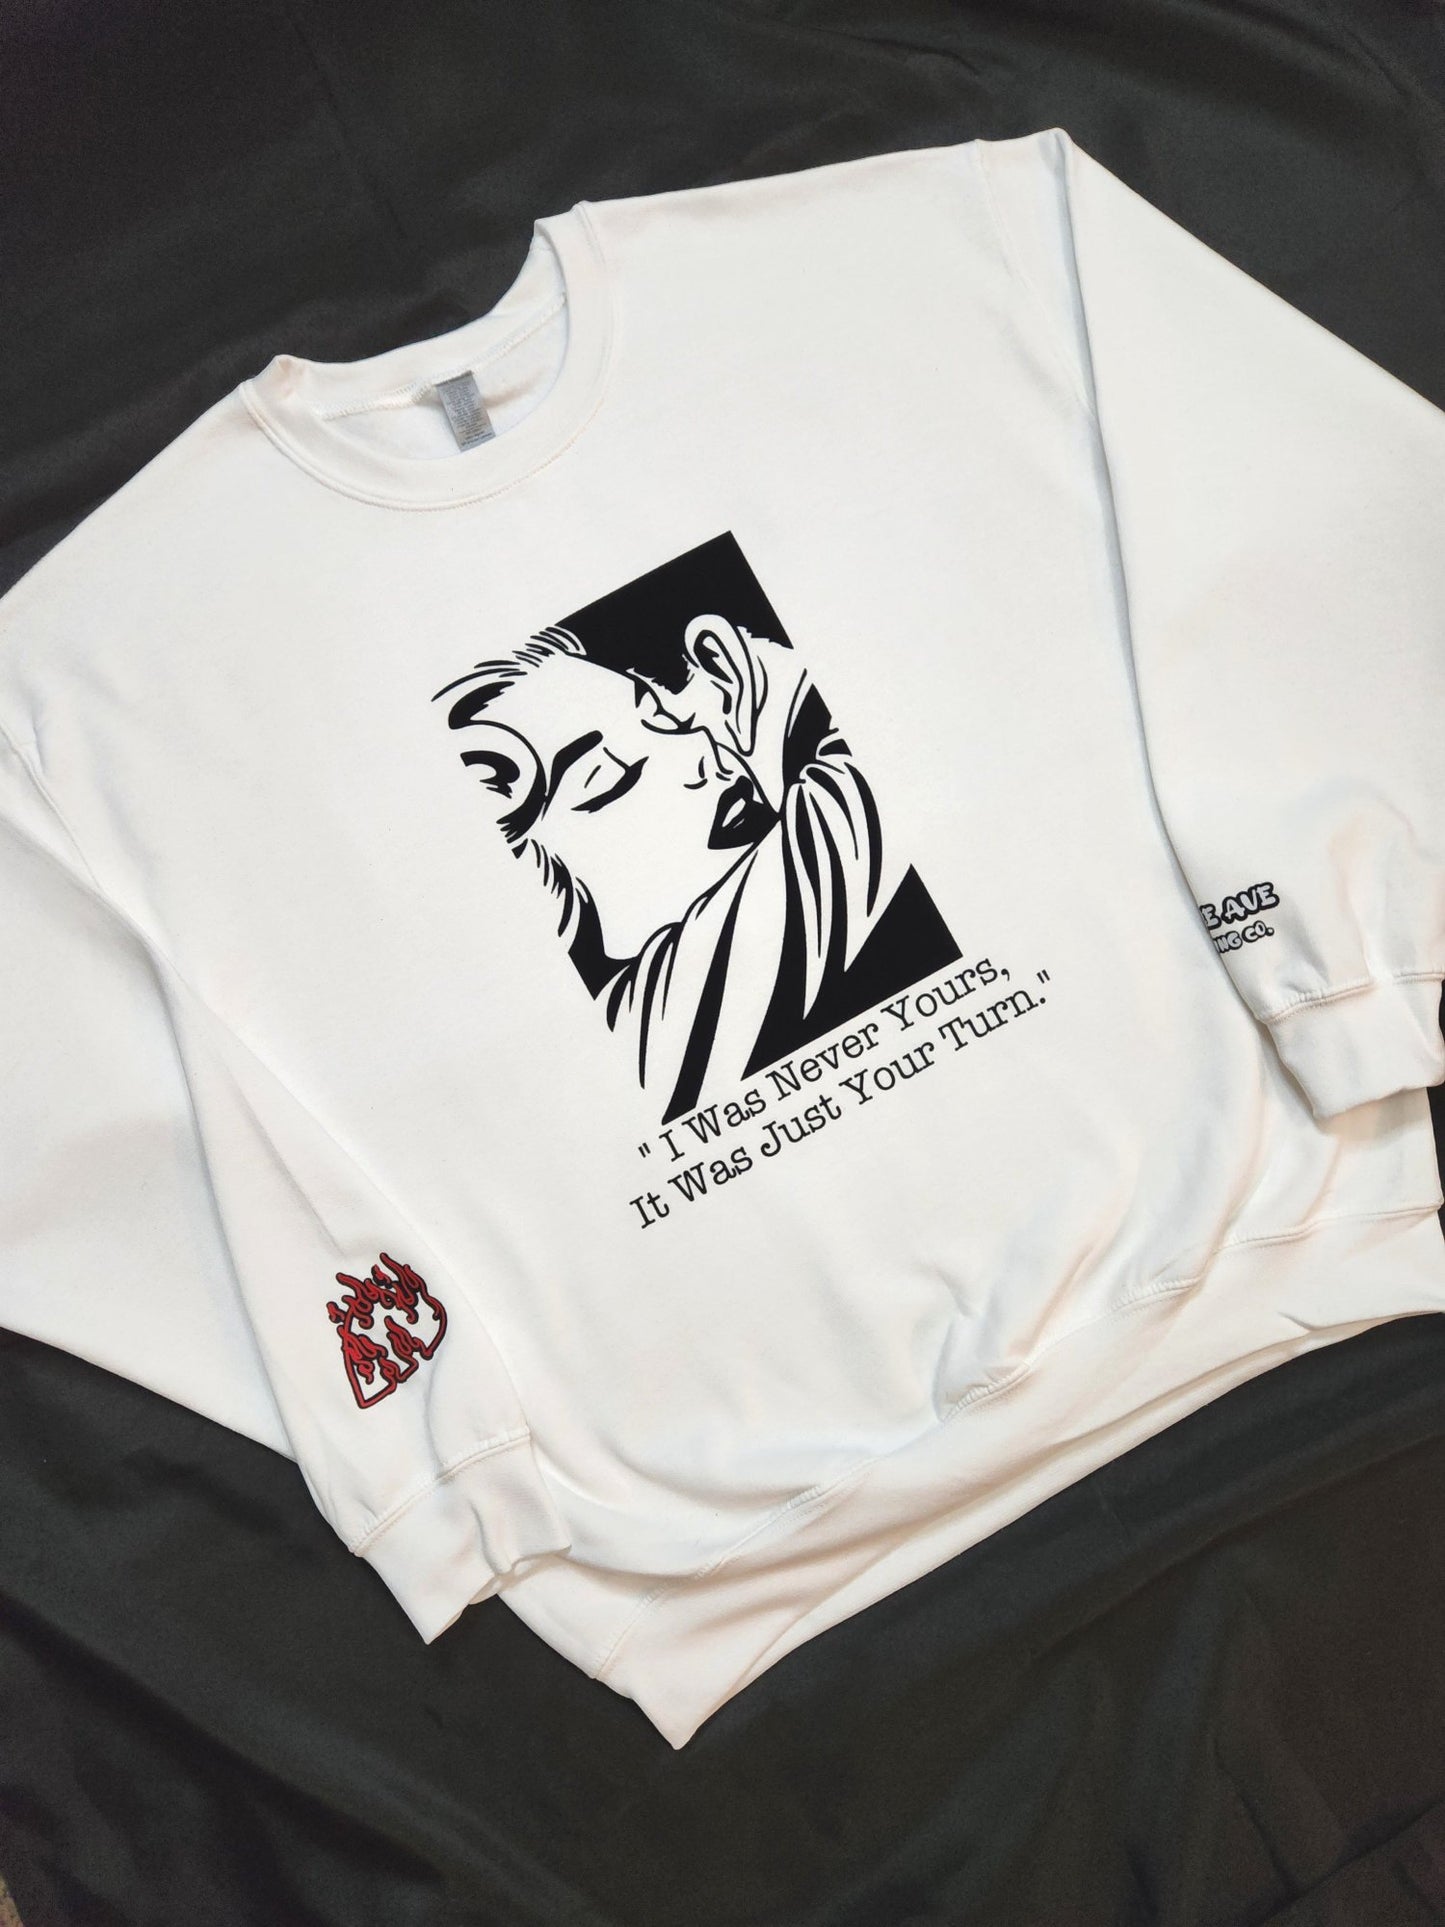 I Was Never Yours Sweatshirt - Centre Ave Clothing Co.